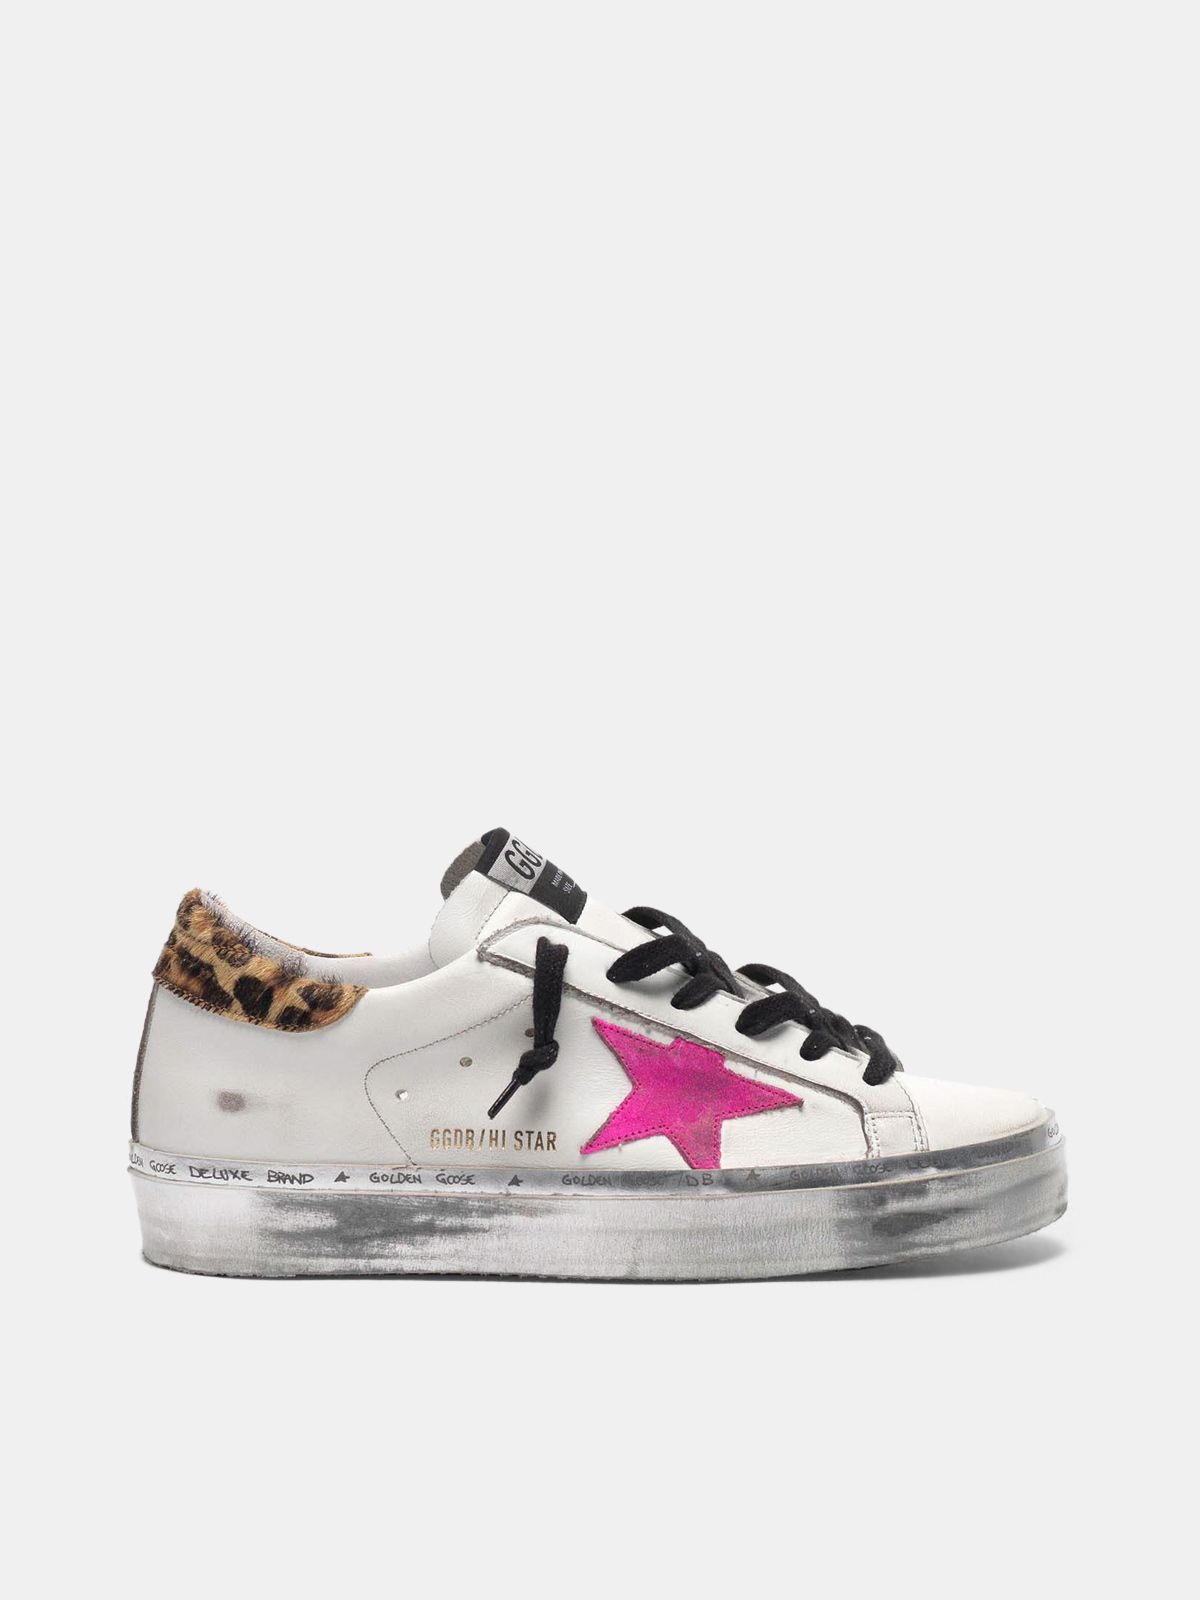 golden goose Star leopard-print tab star sneakers fuchsia heel Hi and with